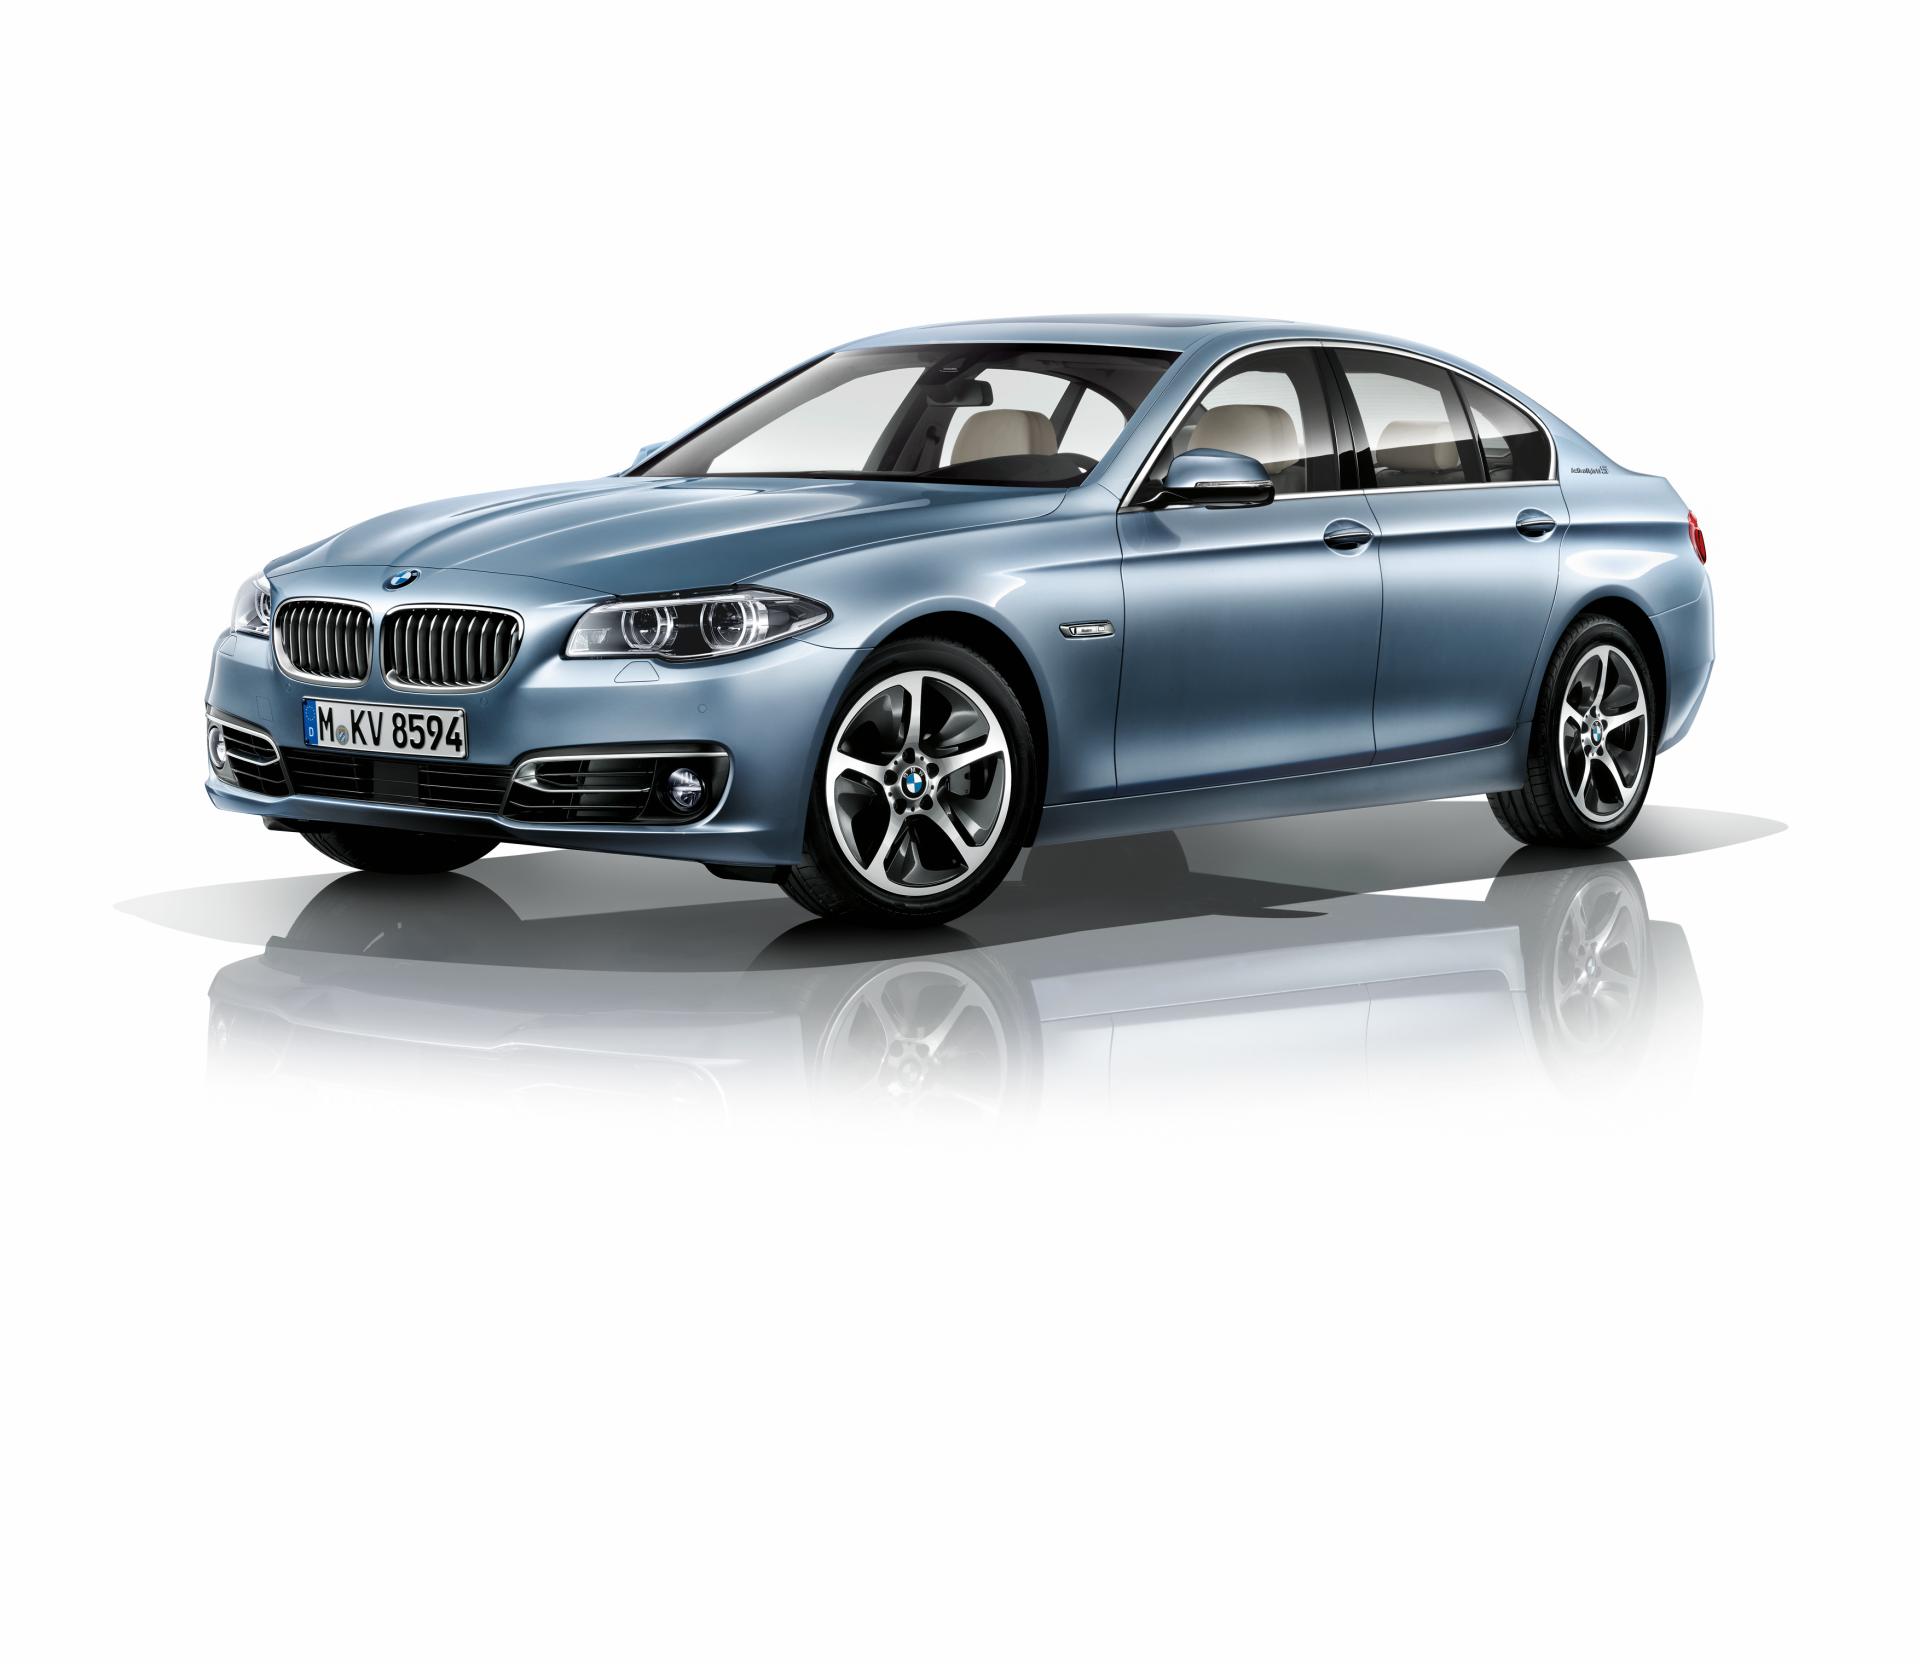 2014 BMW ActiveHybrid 5 News and Information